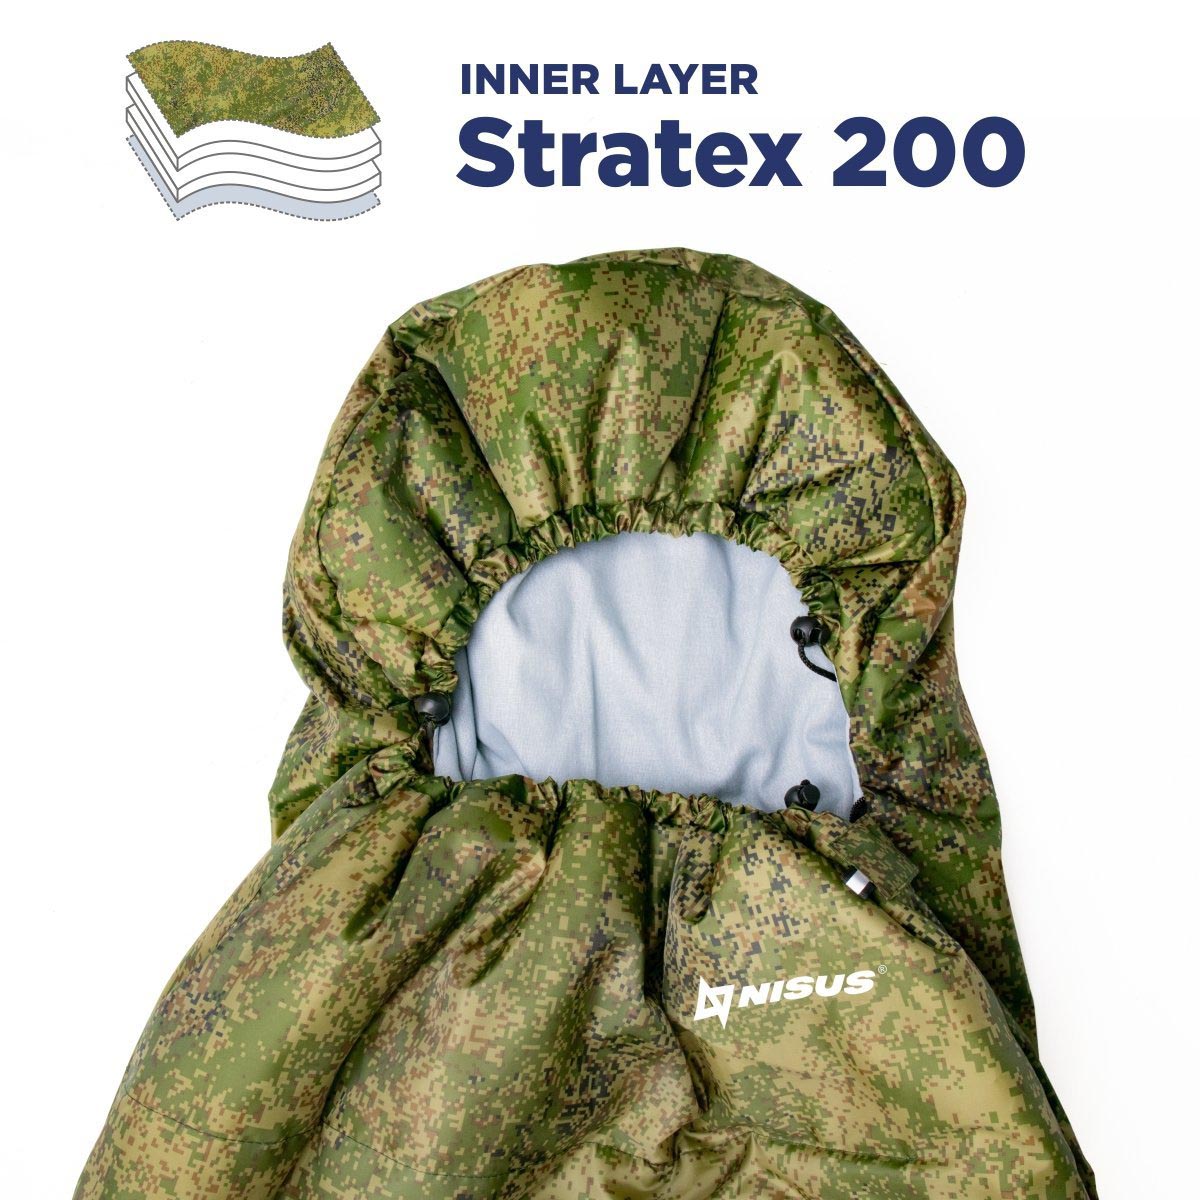 TRAVEL EXTREME 220/90/200 Compact Lightweight Waterproof Synthetic Cotton Lined Camping Sleeping Bag